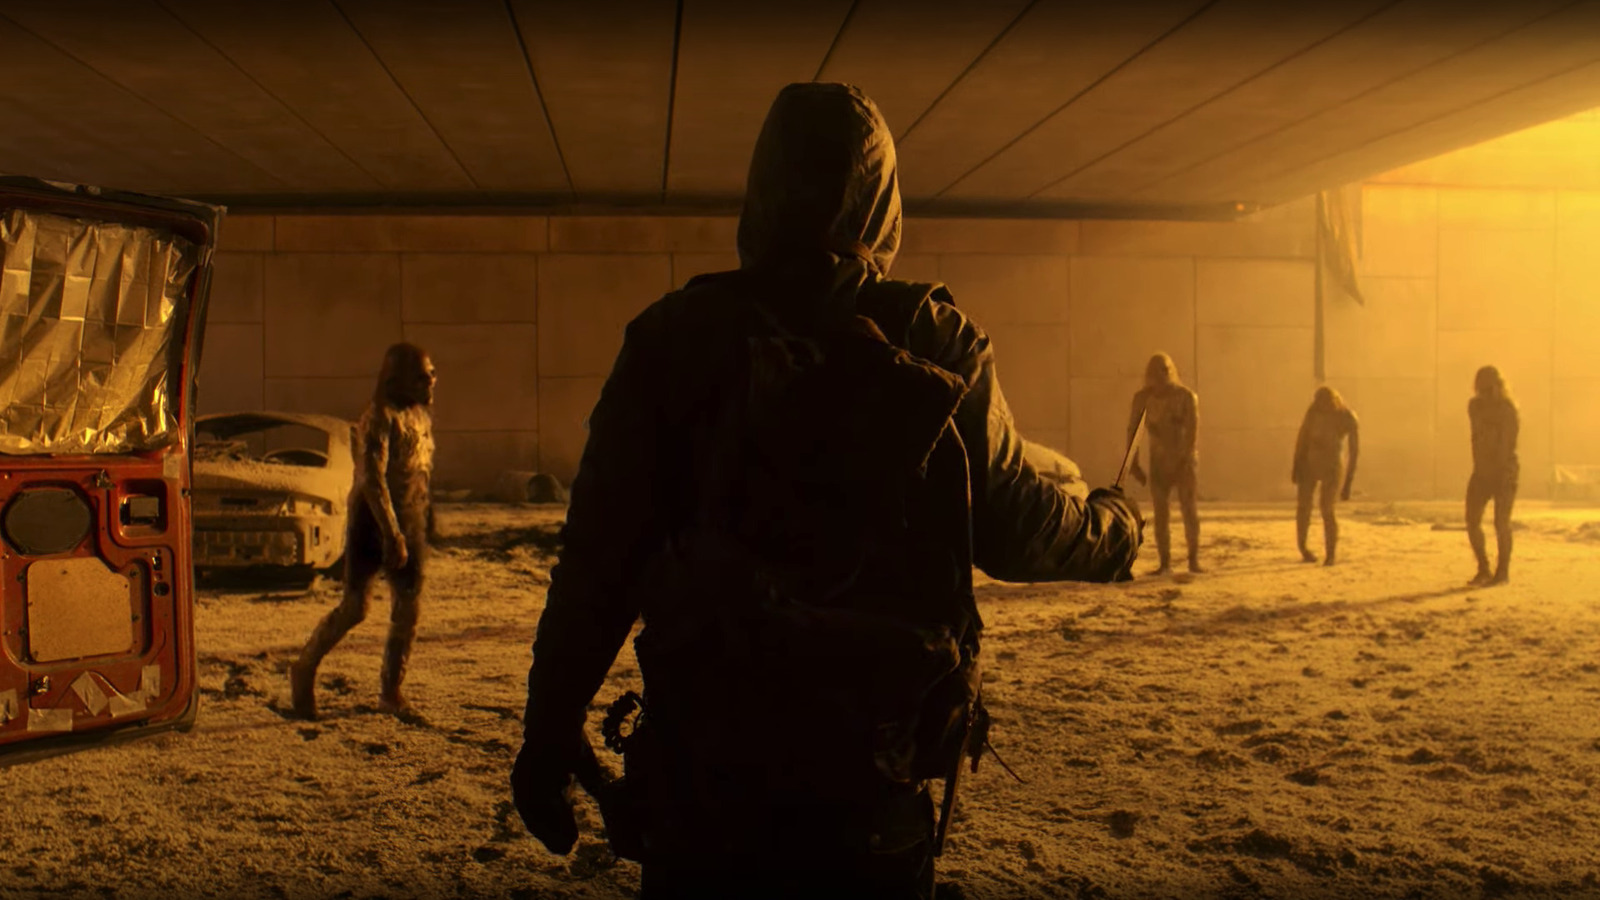 Fear The Walking Dead Season 7 Trailer: The Apocalypse Was Bad Before The Nukes